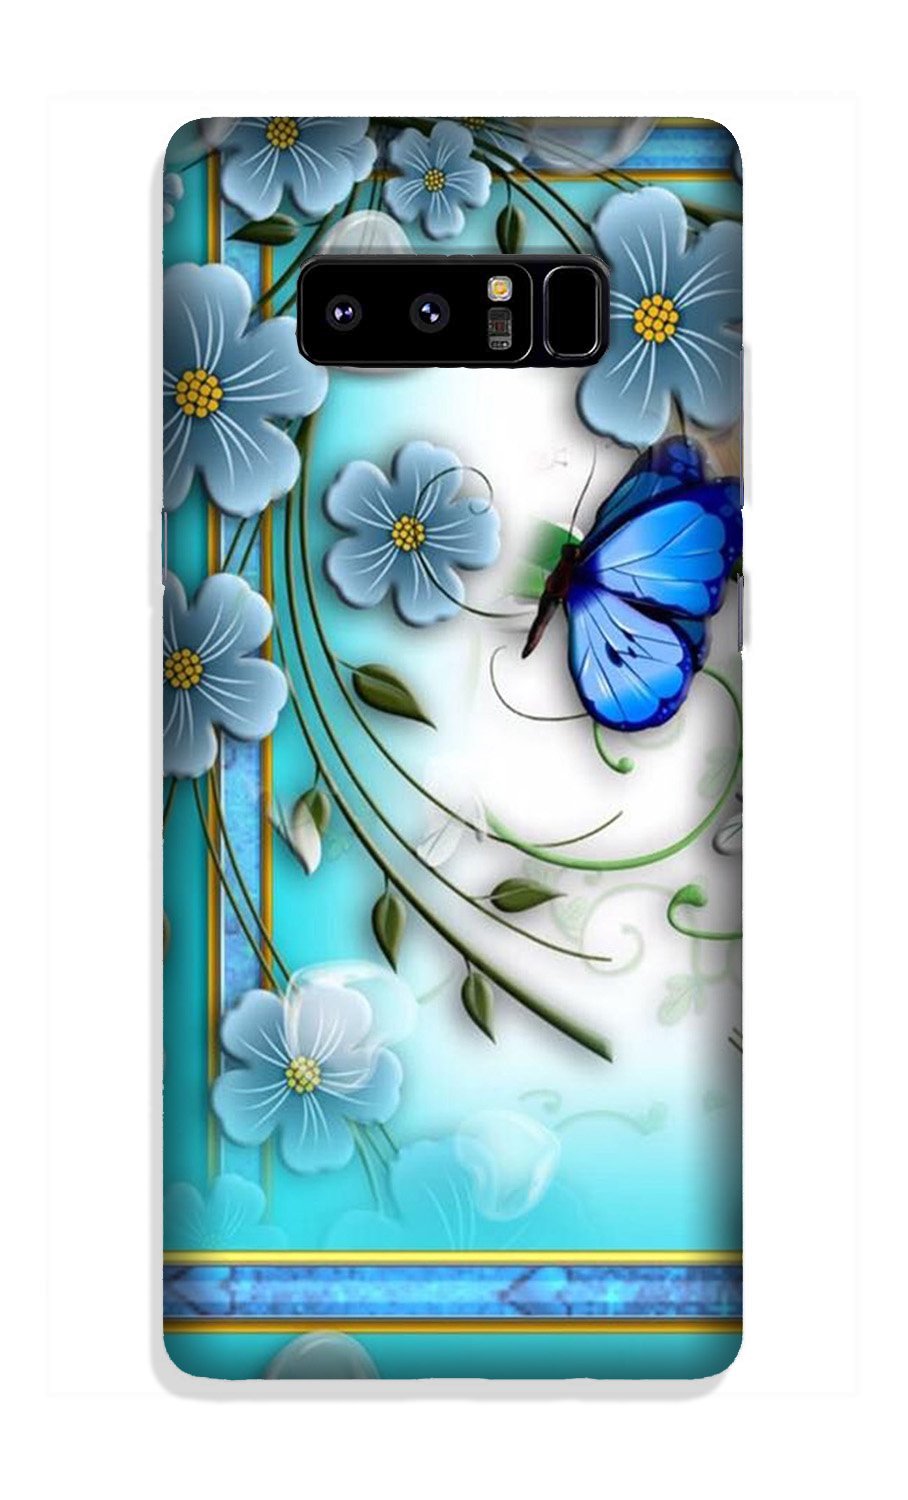 Blue Butterfly Case for Galaxy Note 8